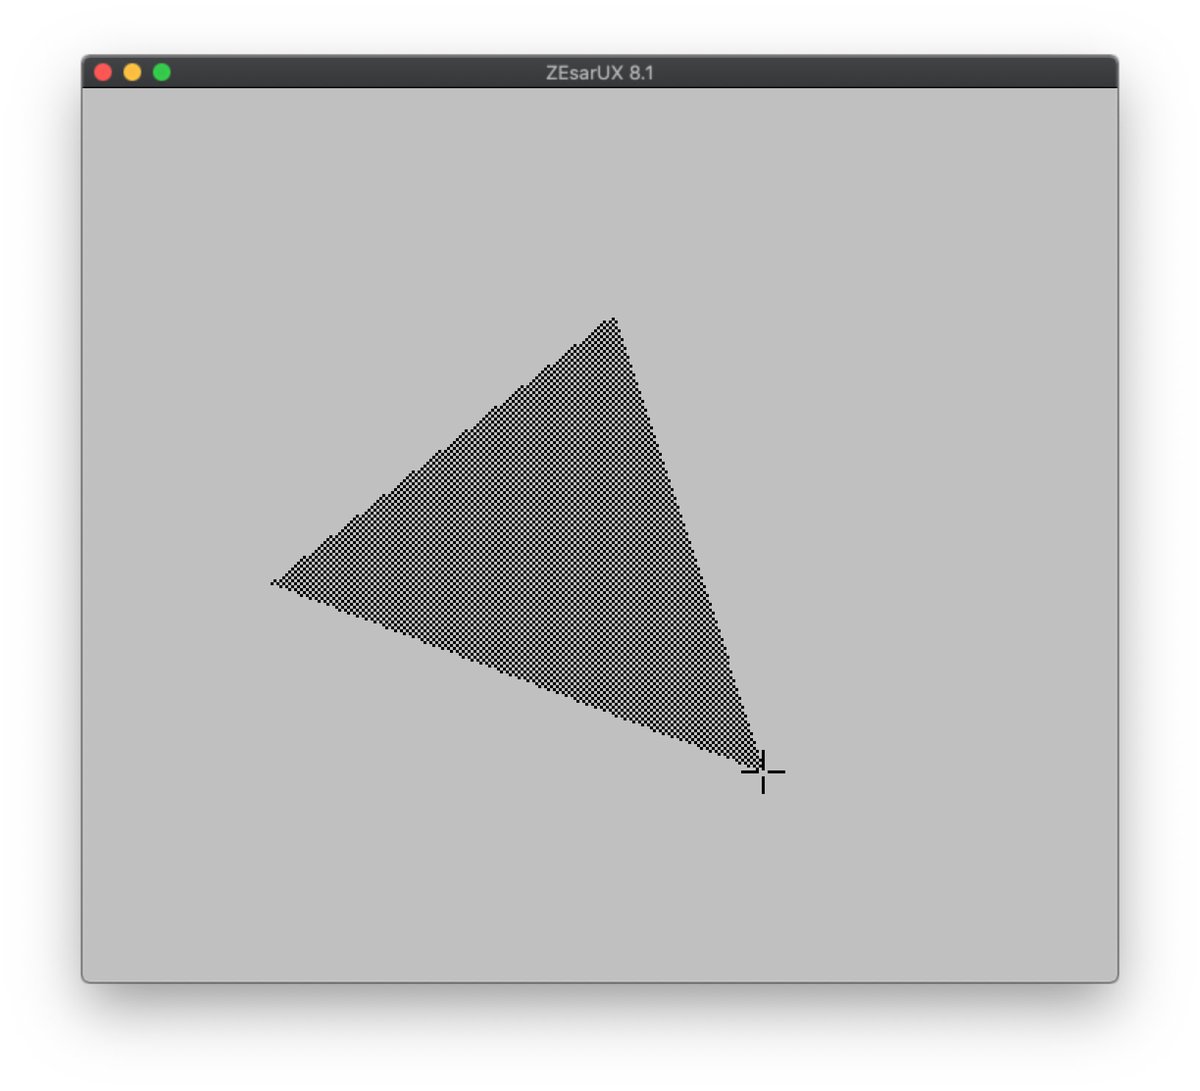 Fixed the bug in my fast filled and textured triangle drawing routine for the ZX Spectrum. I've released the code on GitHub in lib/vector_filled.z80, with an example file in Demo/demo_3D. This will form part of a simple 3D engine I'm tinkering with. https://github.com/breakintoprogram/lib-spectrum